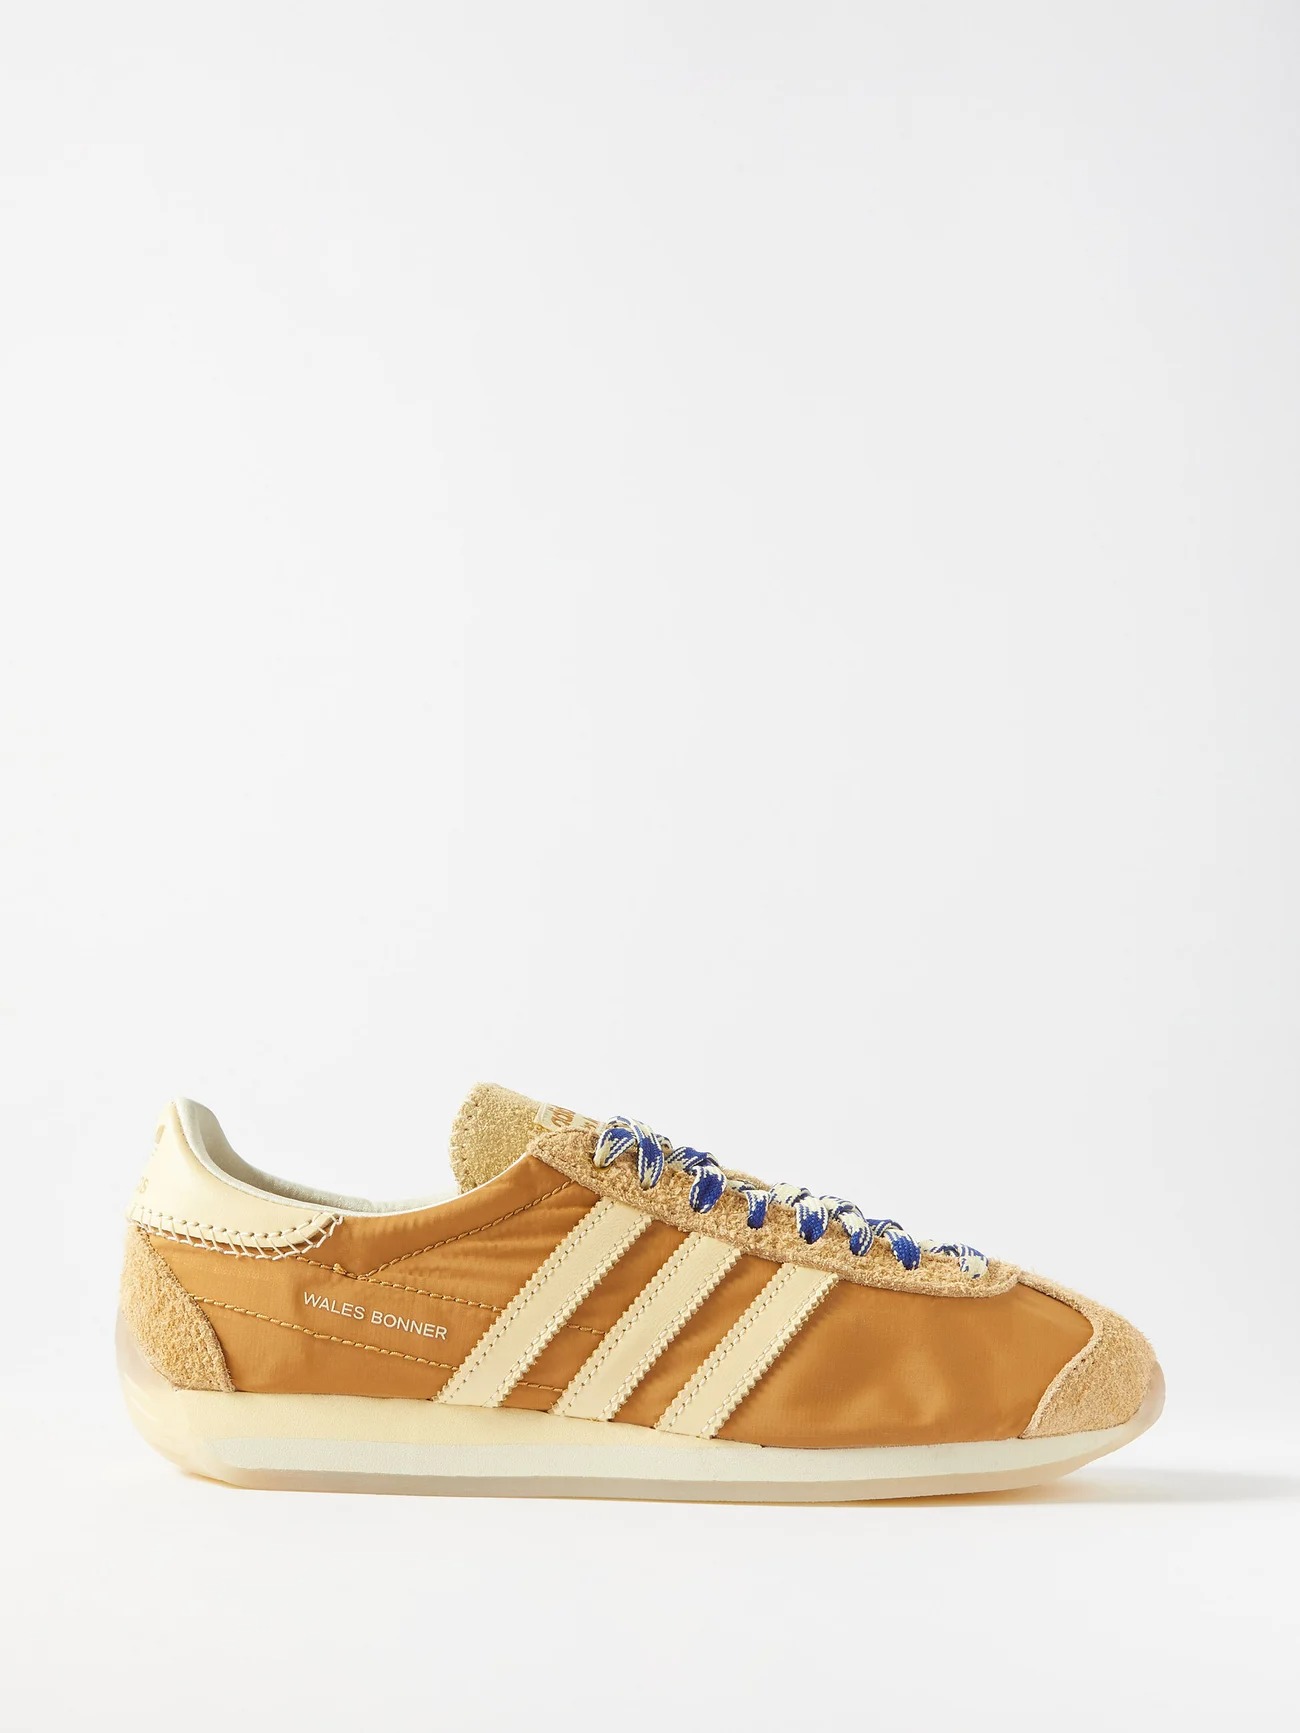 Adidas x Wales Bonner WB Country Leather-Trim Trainers